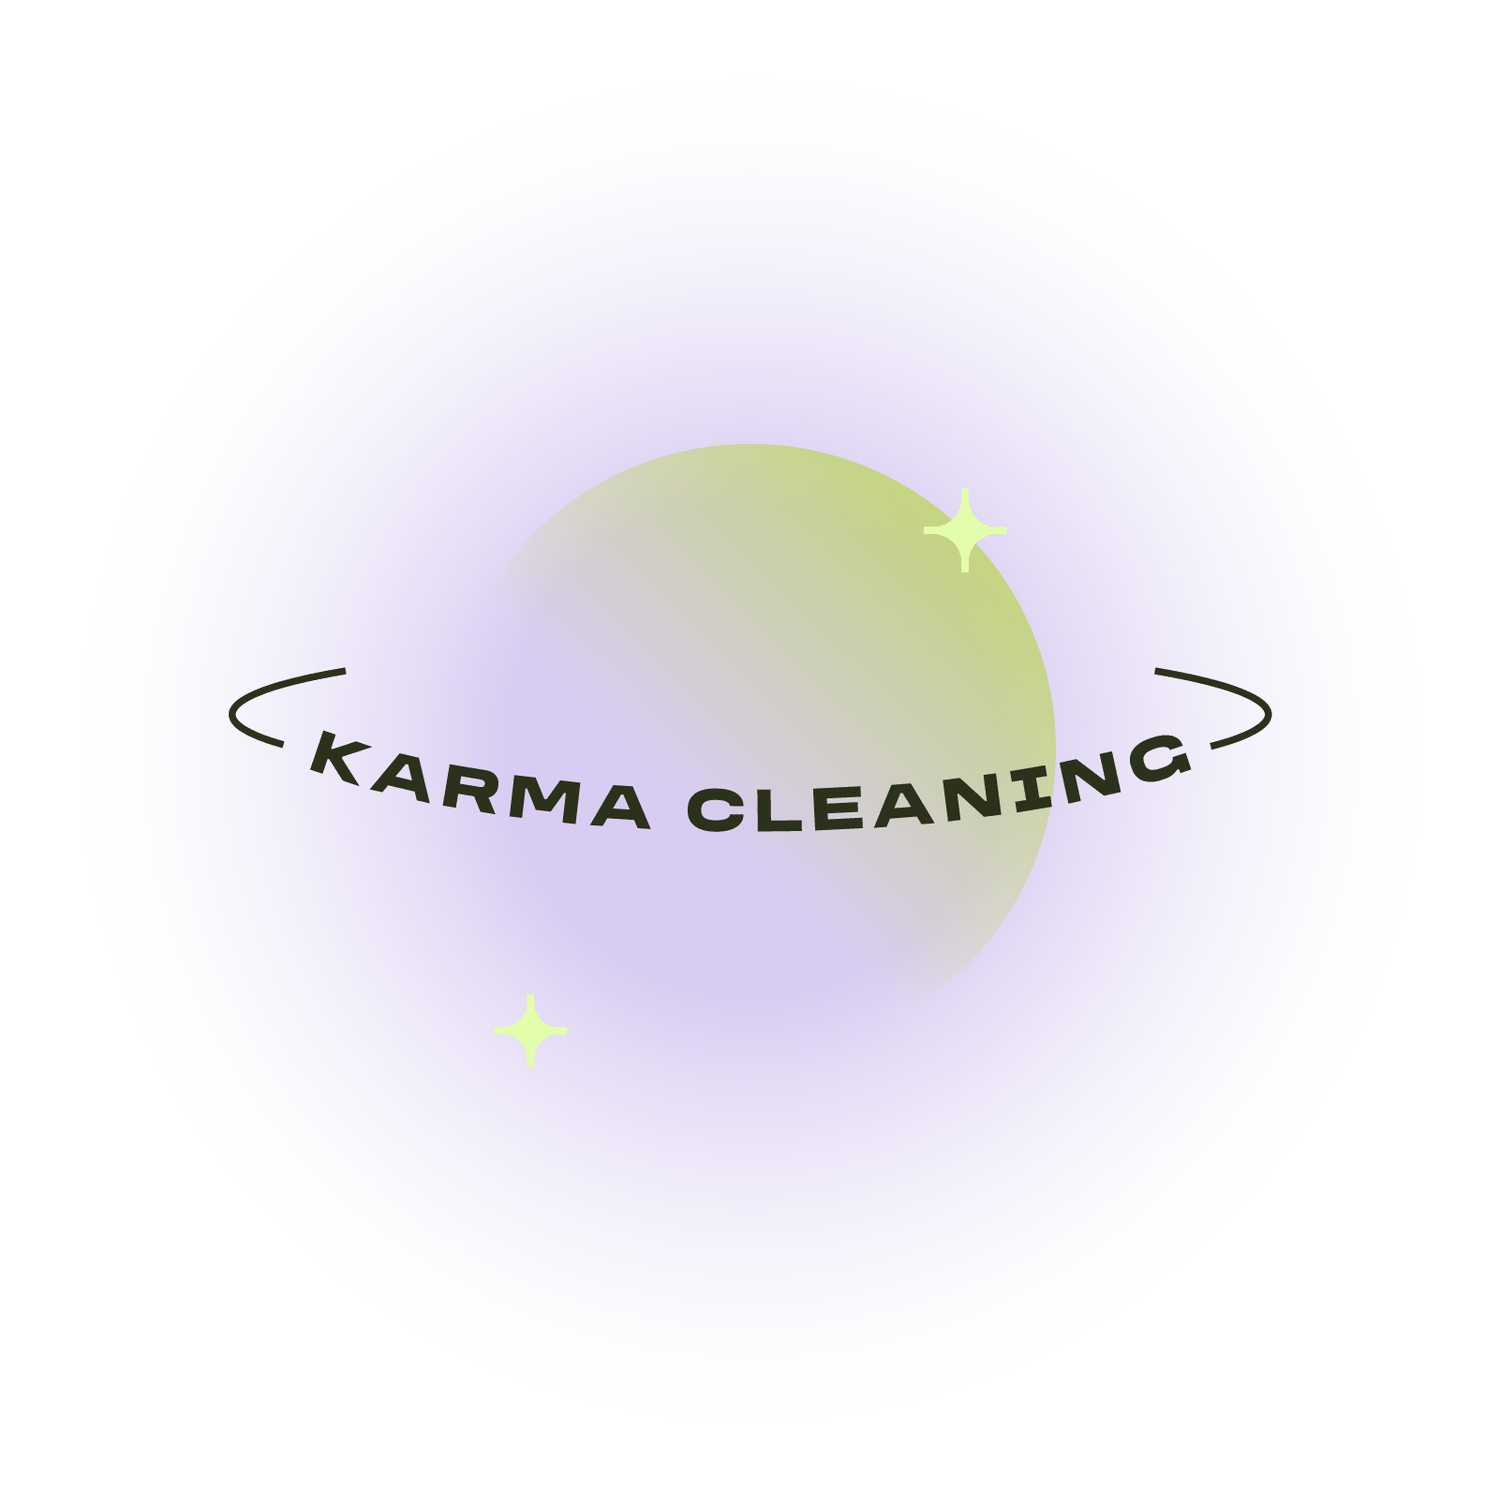 About — Karma Cleaning